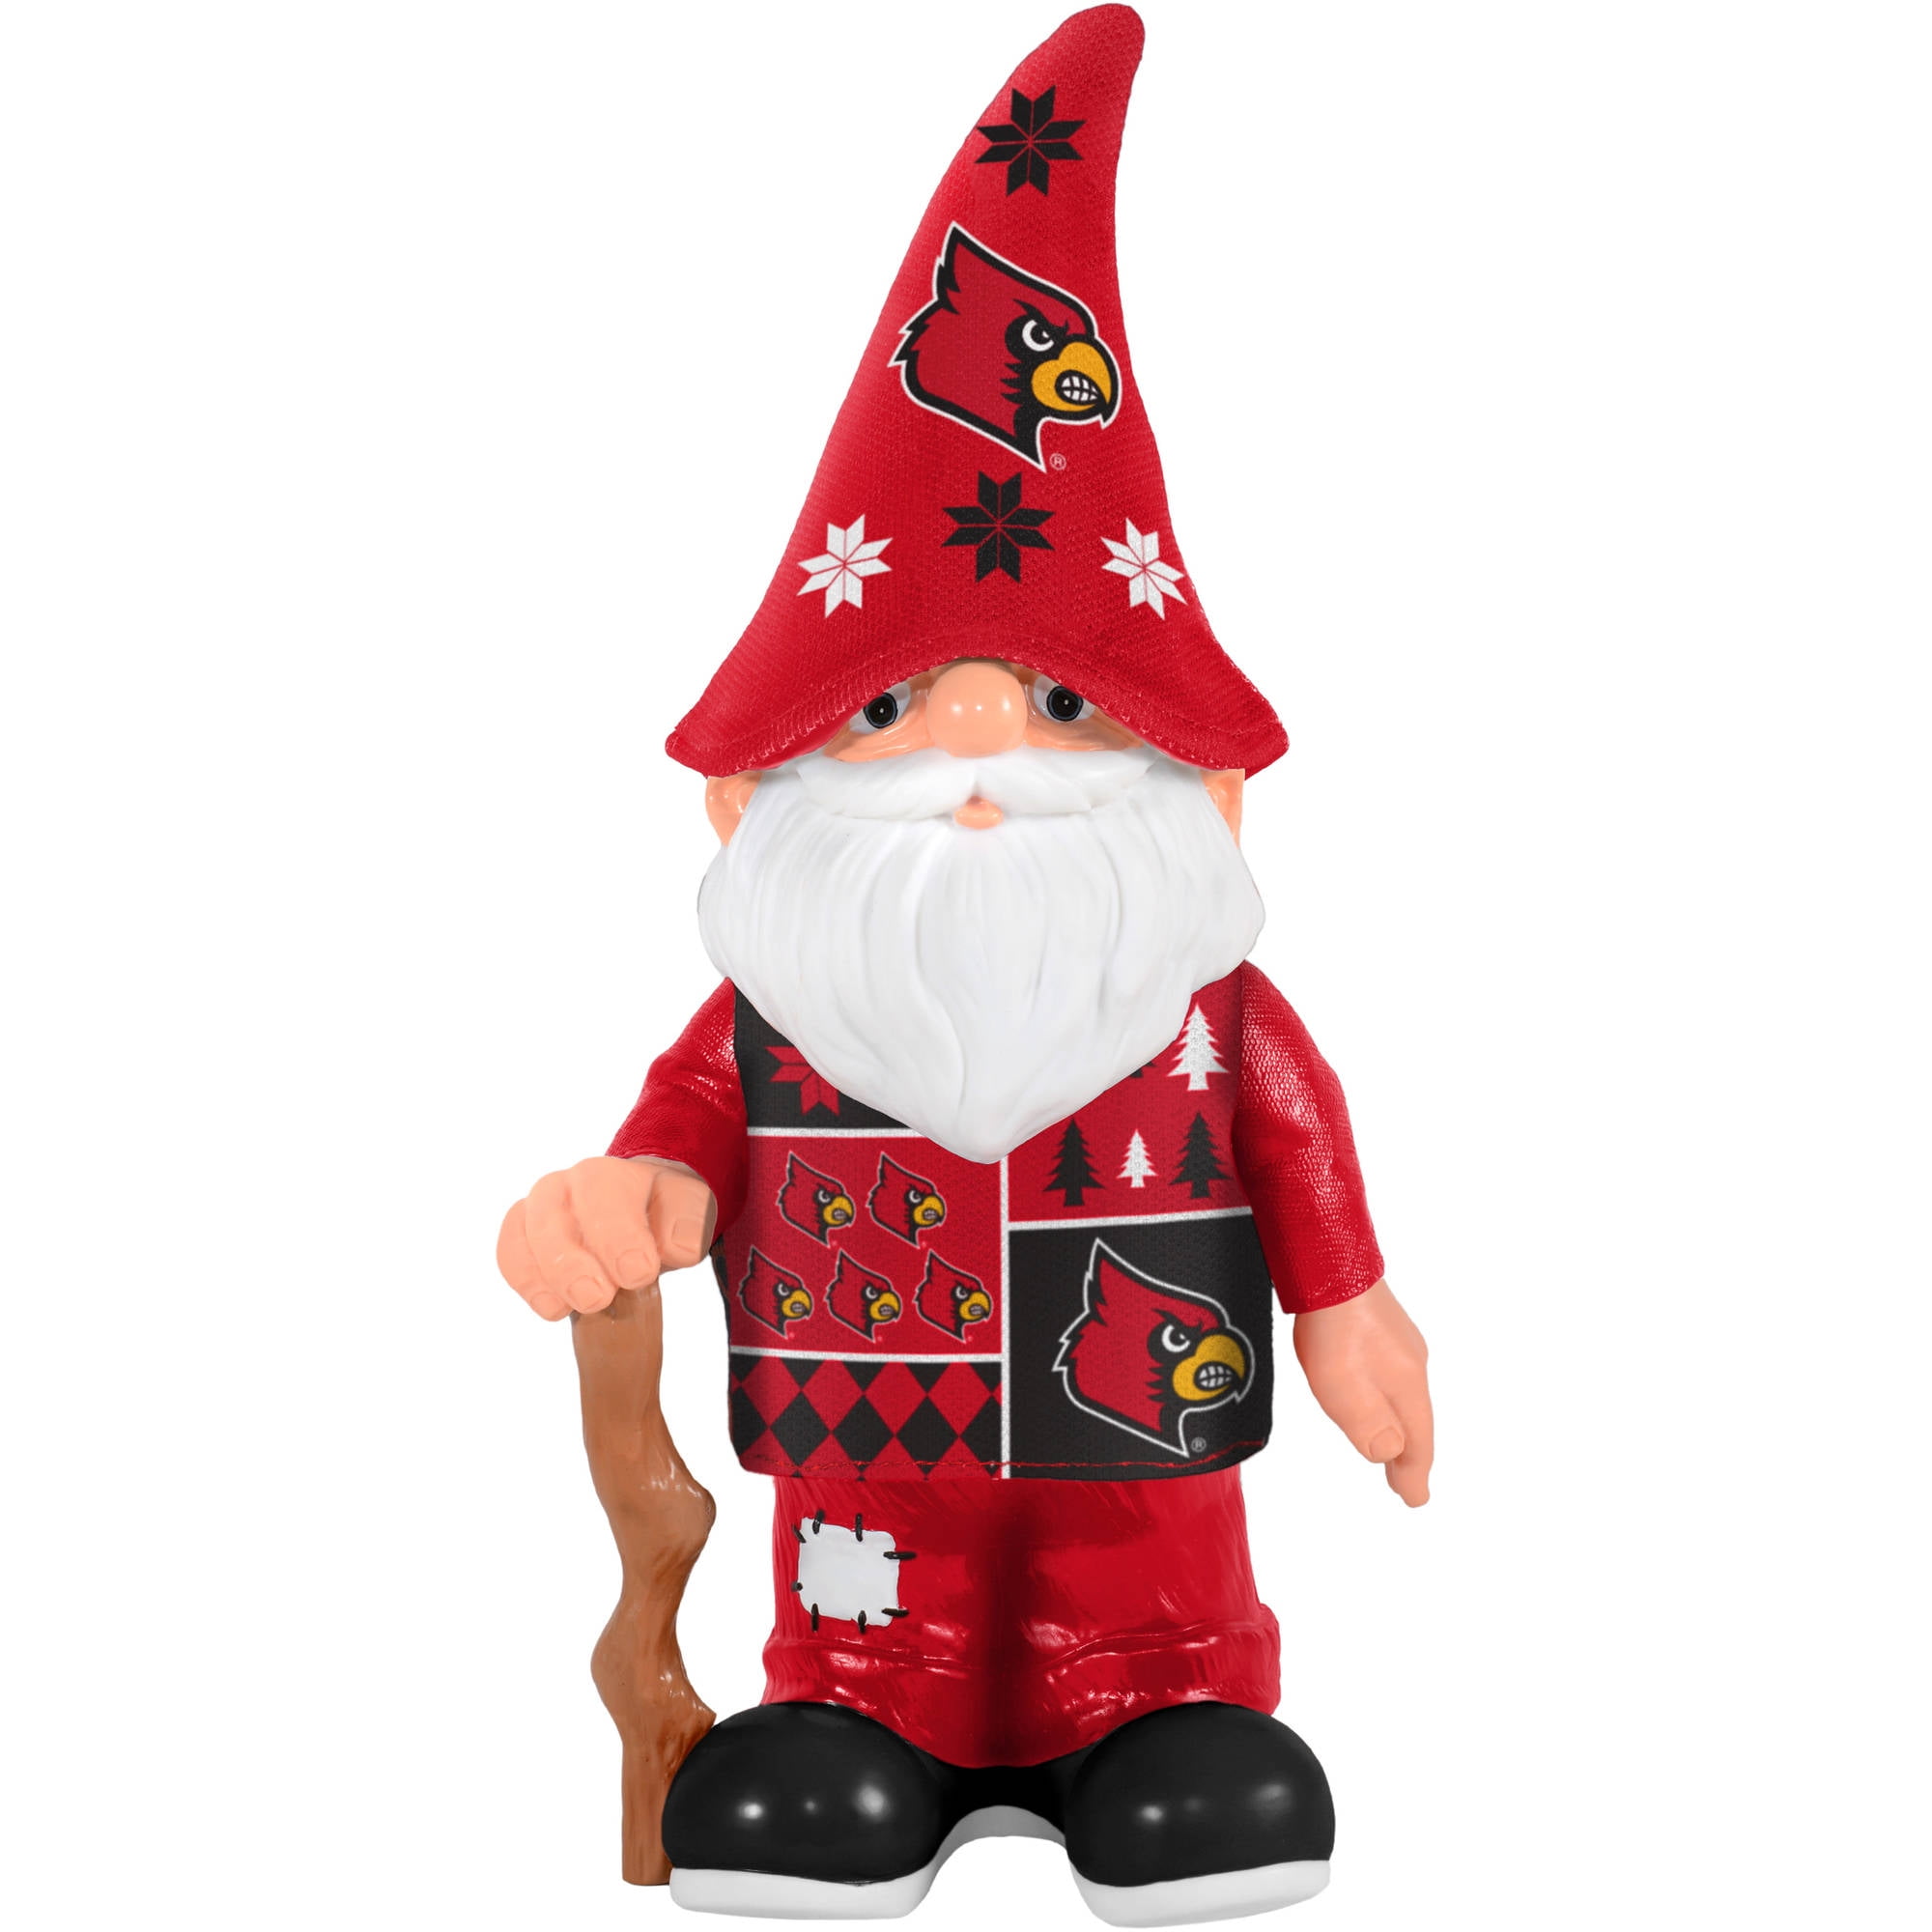 Ugly sweater cardinals The Head